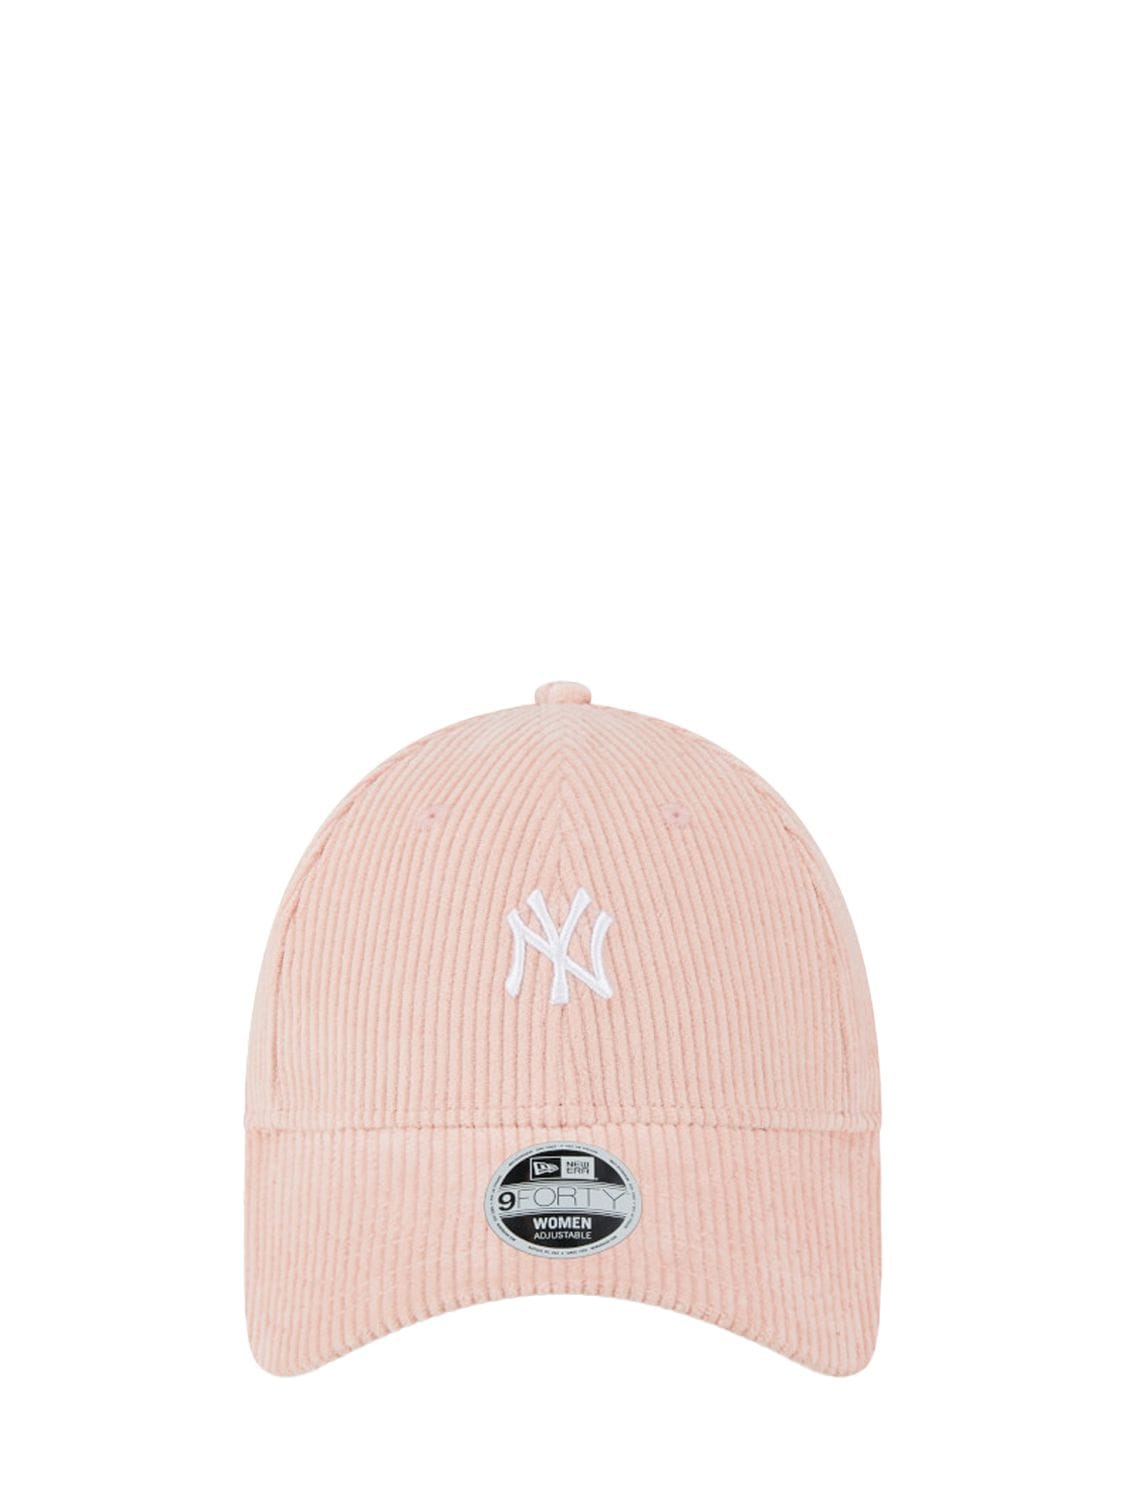 Image of 9forty Ny Yankees Corduroy Cap